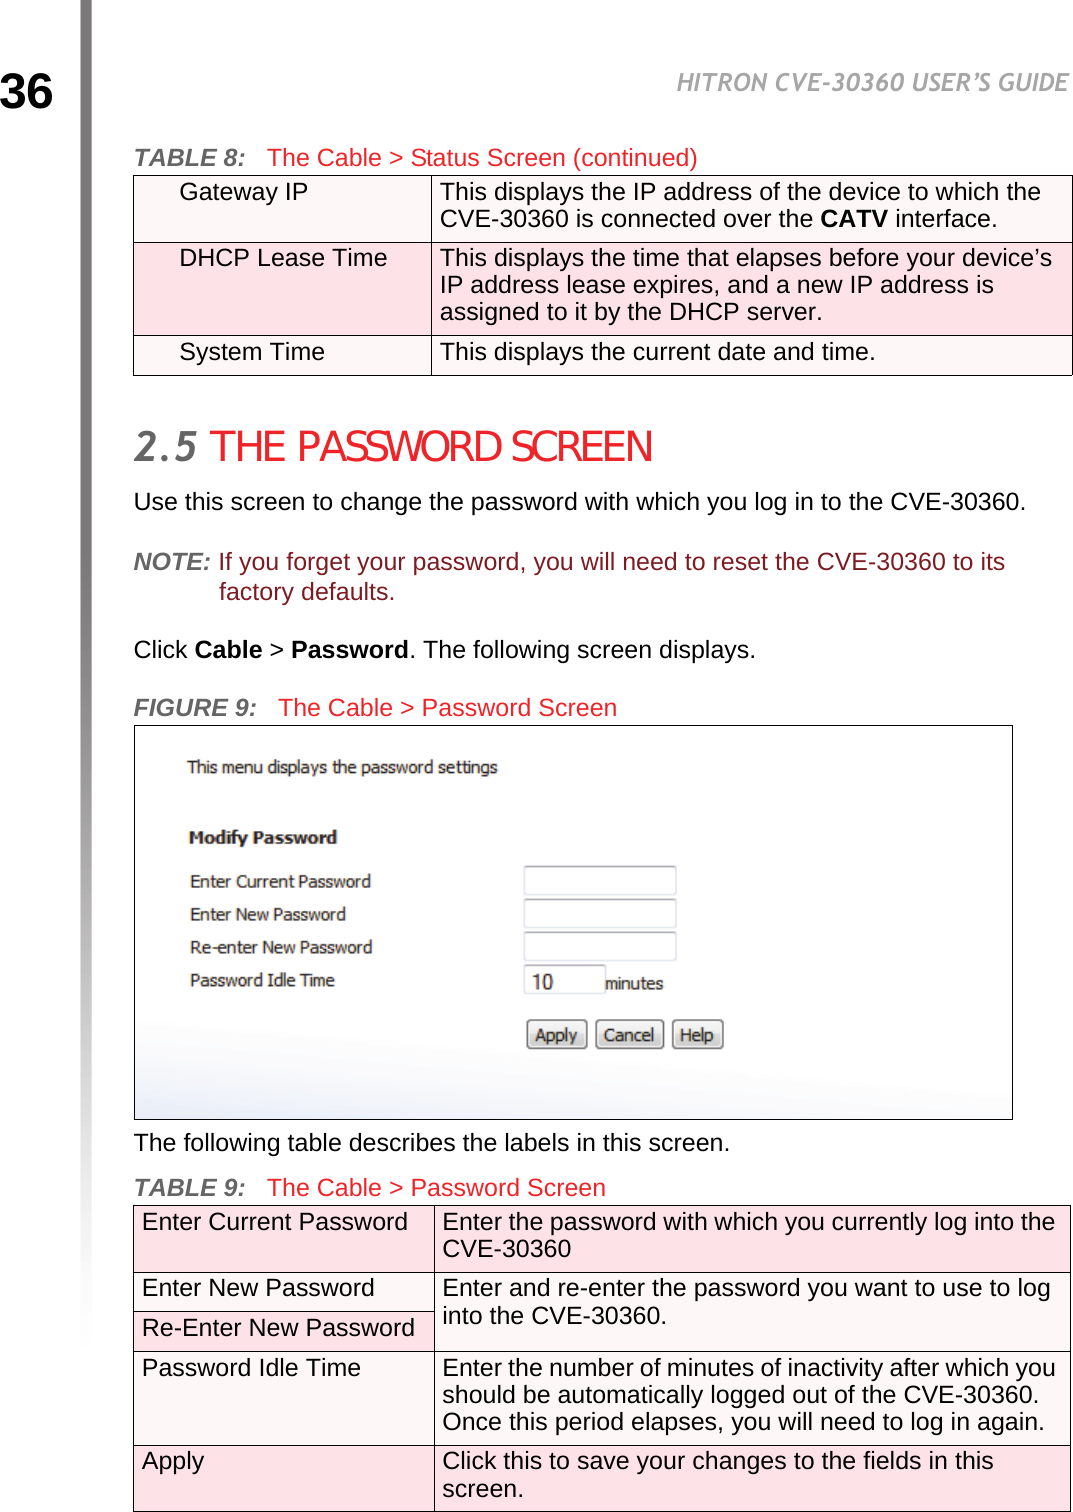 36HITRON CVE-30360 USER’S GUIDECABLE2.5 THE PASSWORD SCREENUse this screen to change the password with which you log in to the CVE-30360.NOTE: If you forget your password, you will need to reset the CVE-30360 to its factory defaults.Click Cable &gt; Password. The following screen displays.FIGURE 9:   The Cable &gt; Password ScreenThe following table describes the labels in this screen.Gateway IP This displays the IP address of the device to which the CVE-30360 is connected over the CATV interface.DHCP Lease Time This displays the time that elapses before your device’s IP address lease expires, and a new IP address is assigned to it by the DHCP server.System Time This displays the current date and time.TABLE 9:   The Cable &gt; Password Screen Enter Current Password Enter the password with which you currently log into the CVE-30360Enter New Password Enter and re-enter the password you want to use to log into the CVE-30360.Re-Enter New PasswordPassword Idle Time Enter the number of minutes of inactivity after which you should be automatically logged out of the CVE-30360. Once this period elapses, you will need to log in again.Apply Click this to save your changes to the fields in this screen.TABLE 8:   The Cable &gt; Status Screen (continued)